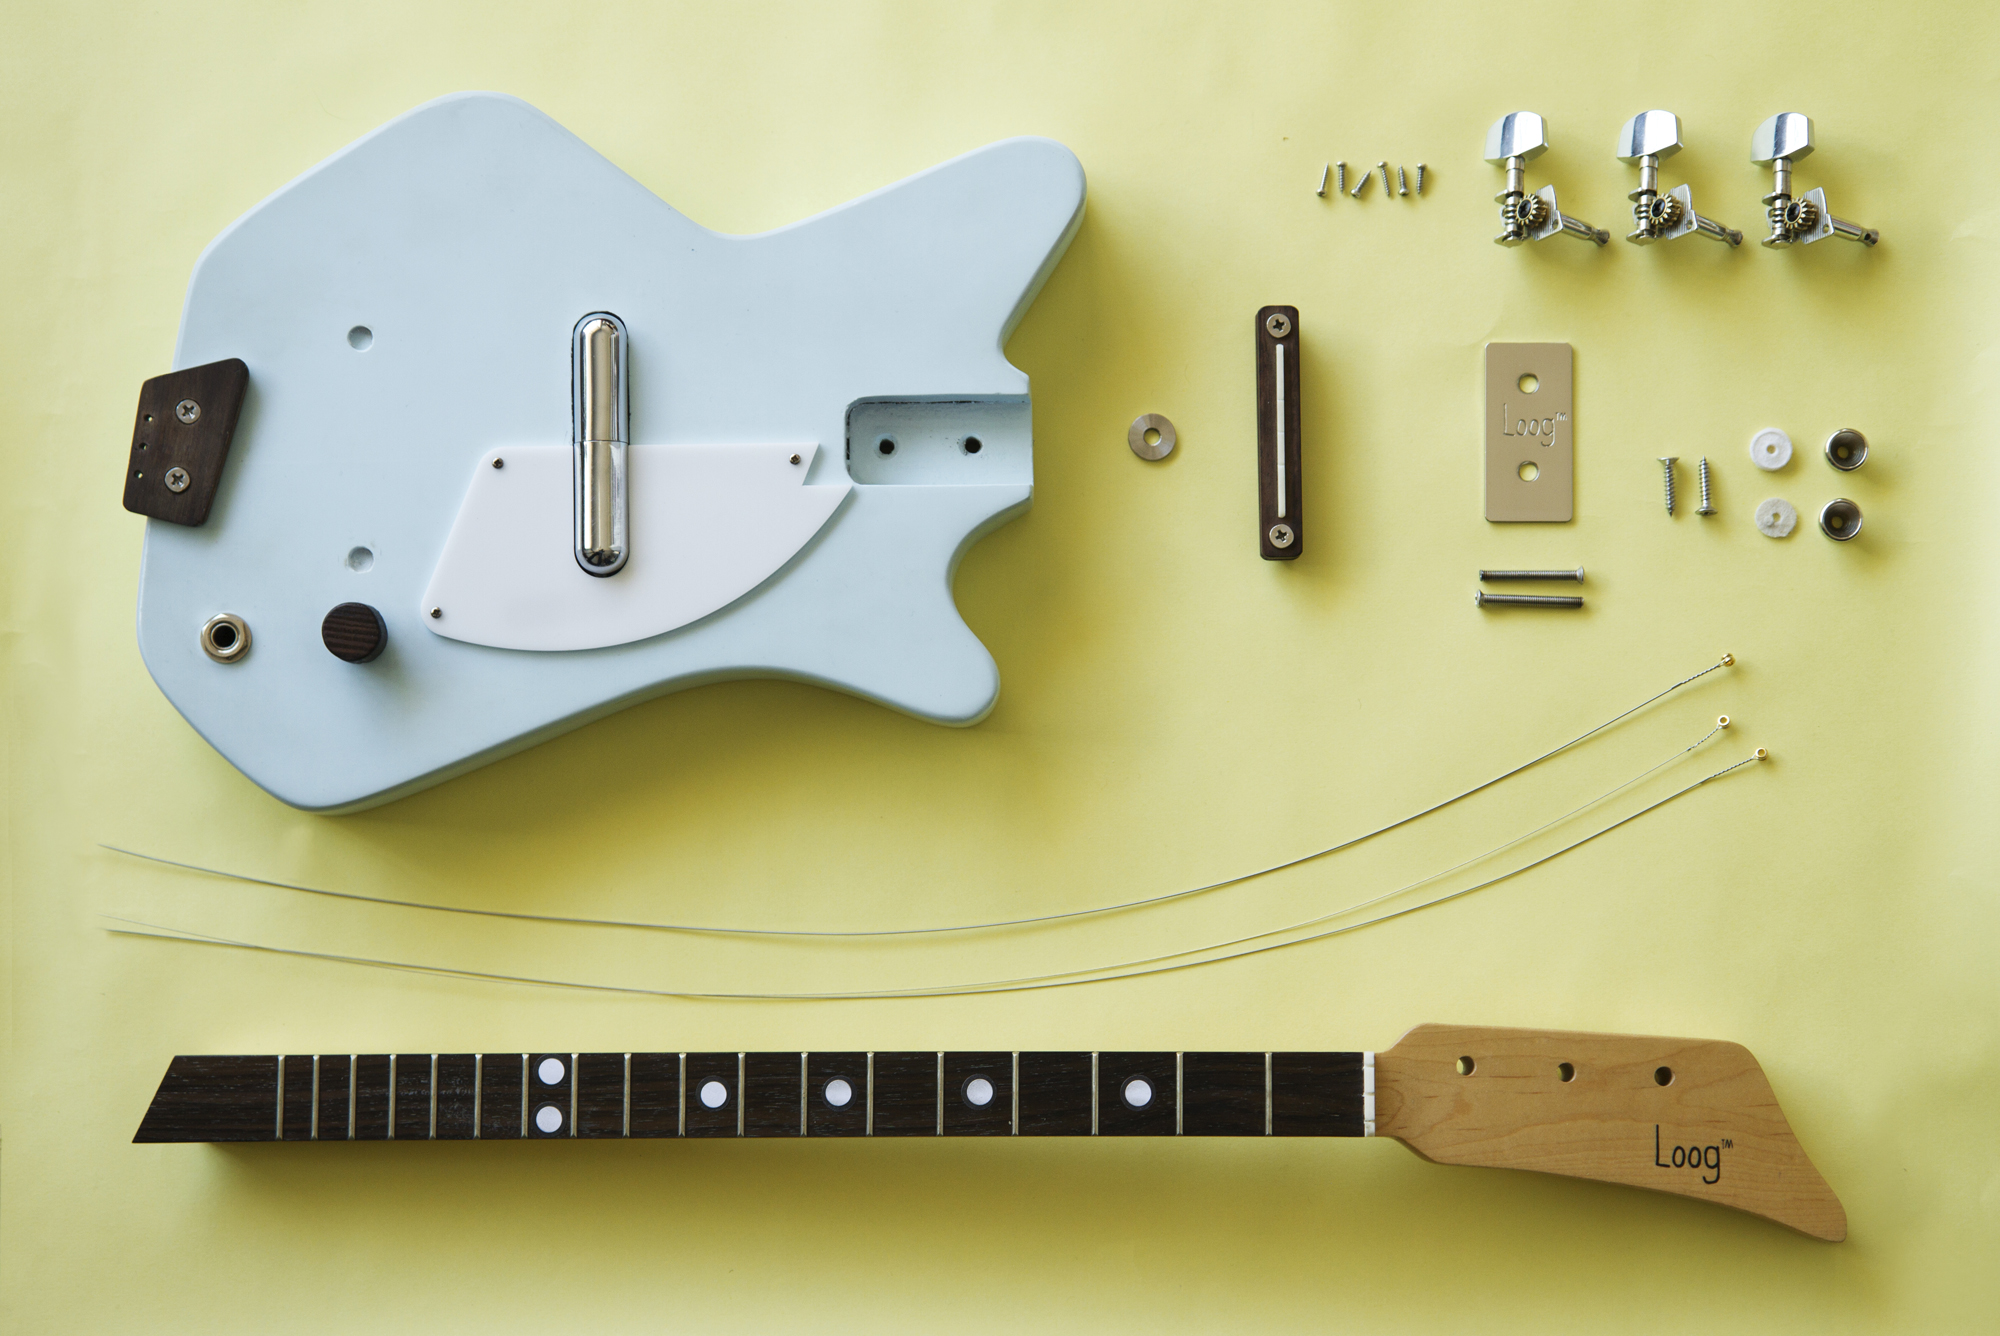 For Those About To Rock: A Cool 3-String Guitar You Build Yourself